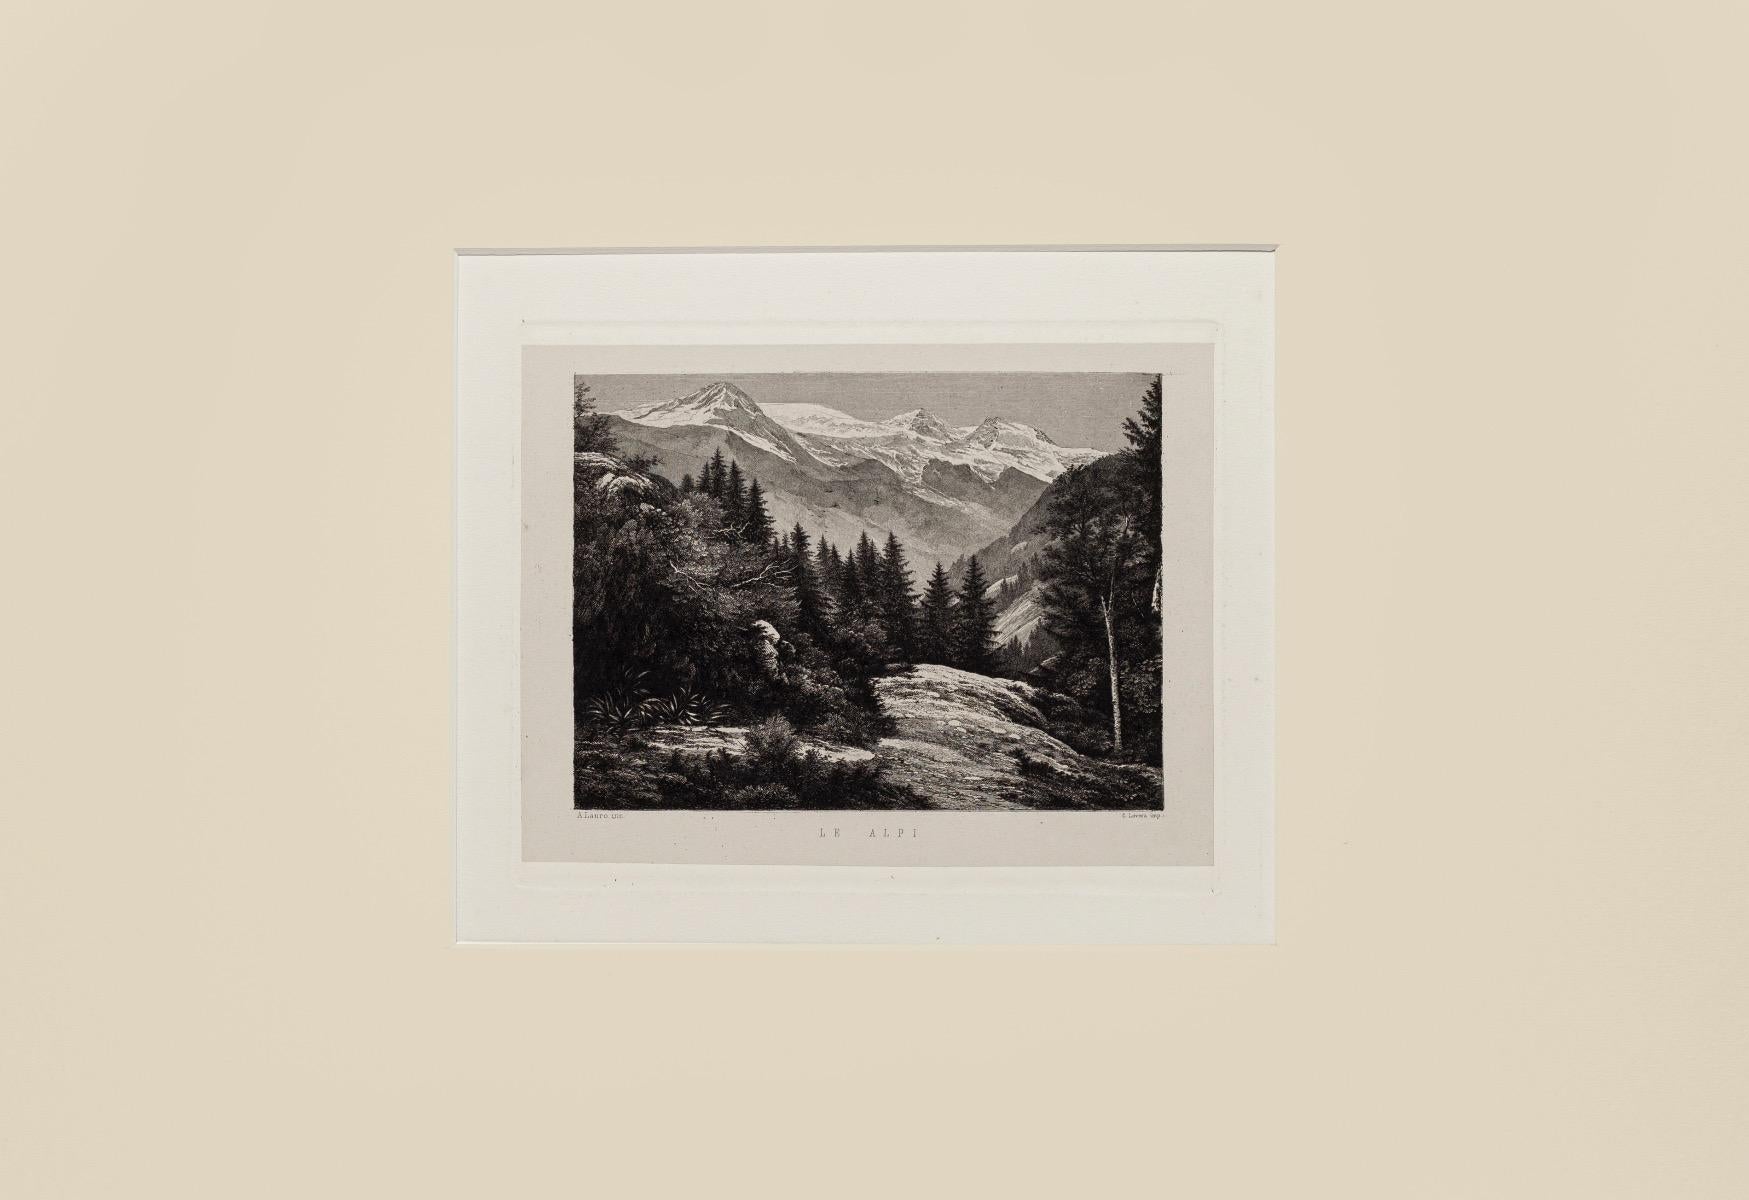 Alps is an original lithography artwork on paper realized by A. Lauro in the XX century. 

The State of preservation is very good.

Included a white Passepartout: 34 x 49 cm.

The artwork represents a scenery of the Alps mountains in the background,